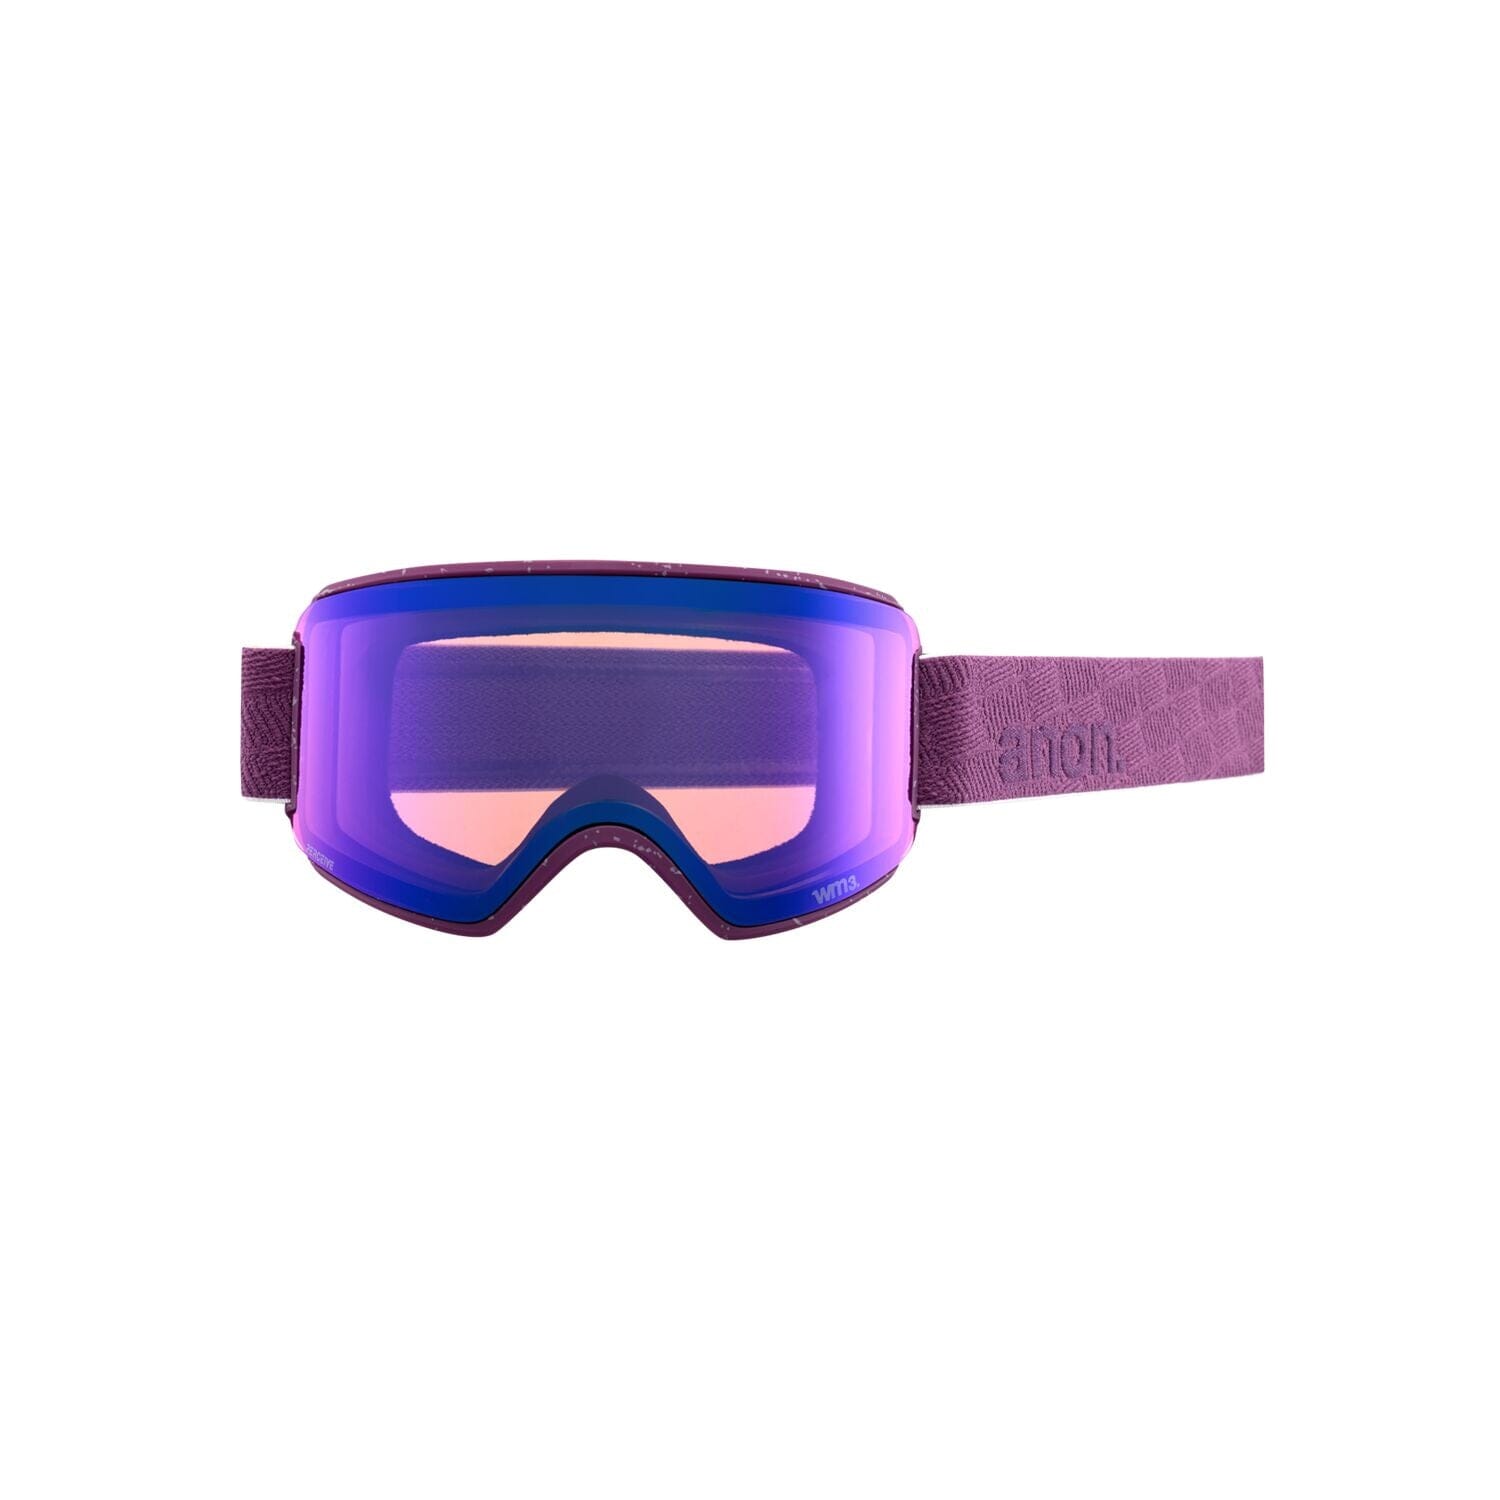 ANON WM3 Grape - Perceive Sunny Onyx + Perceive Variable Violet + Facemask Snow Goggle Snow Goggles Anon 